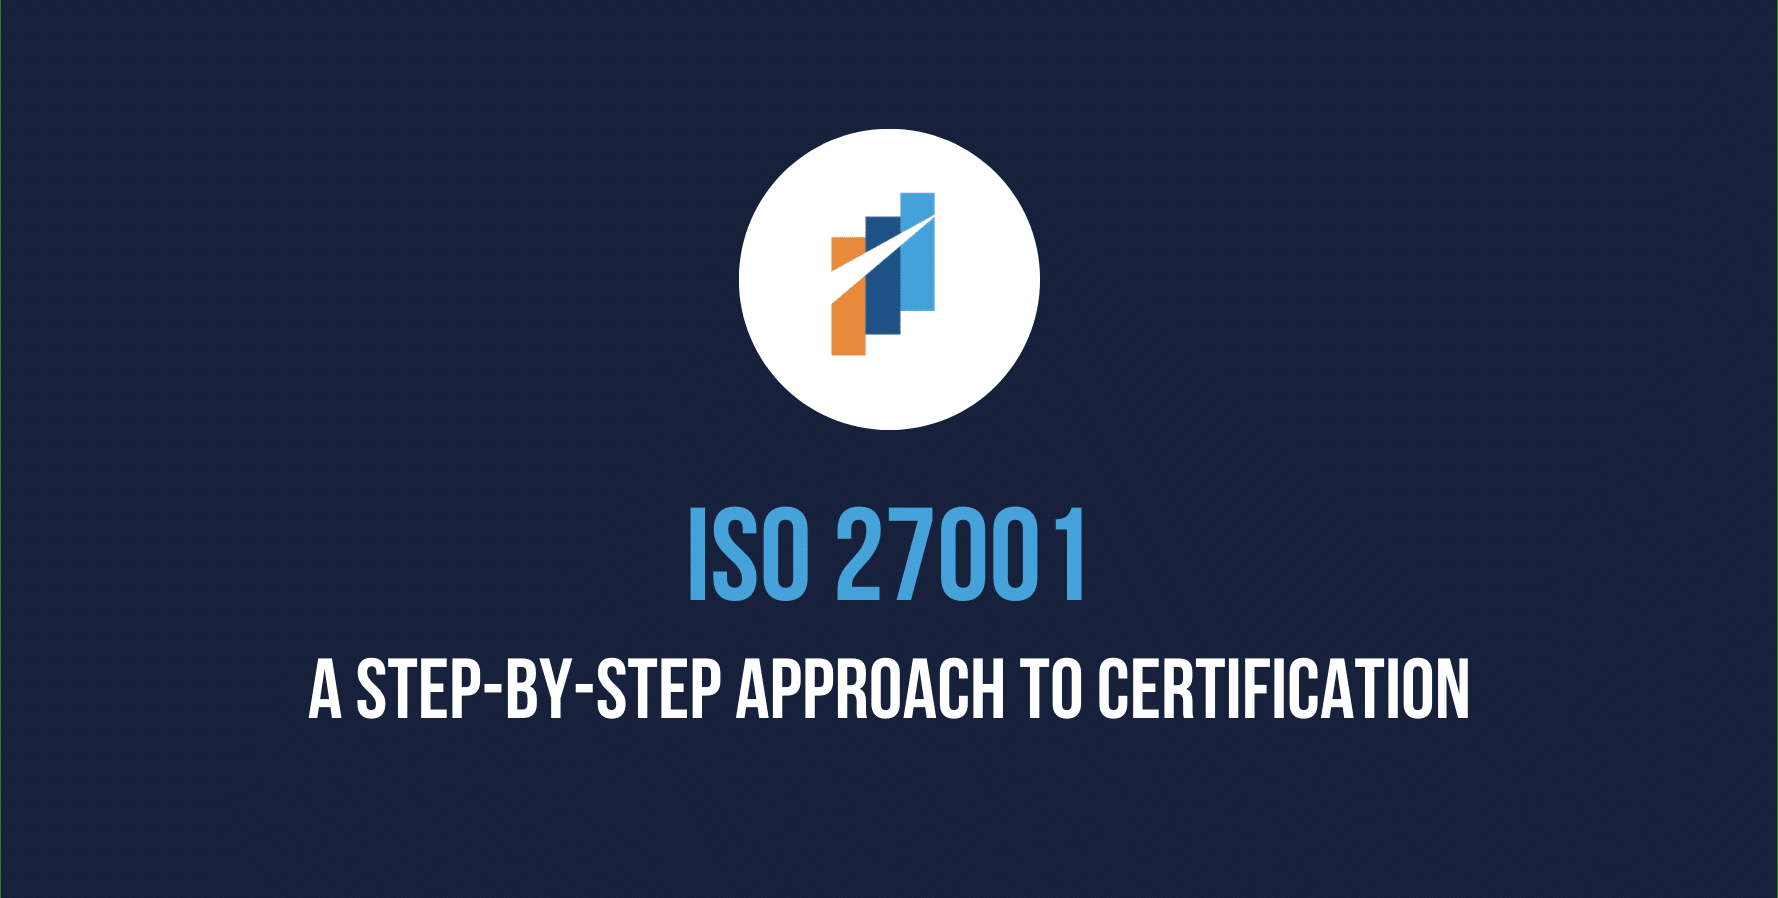 ISO 27001: A Step-by-Step Approach to Certification